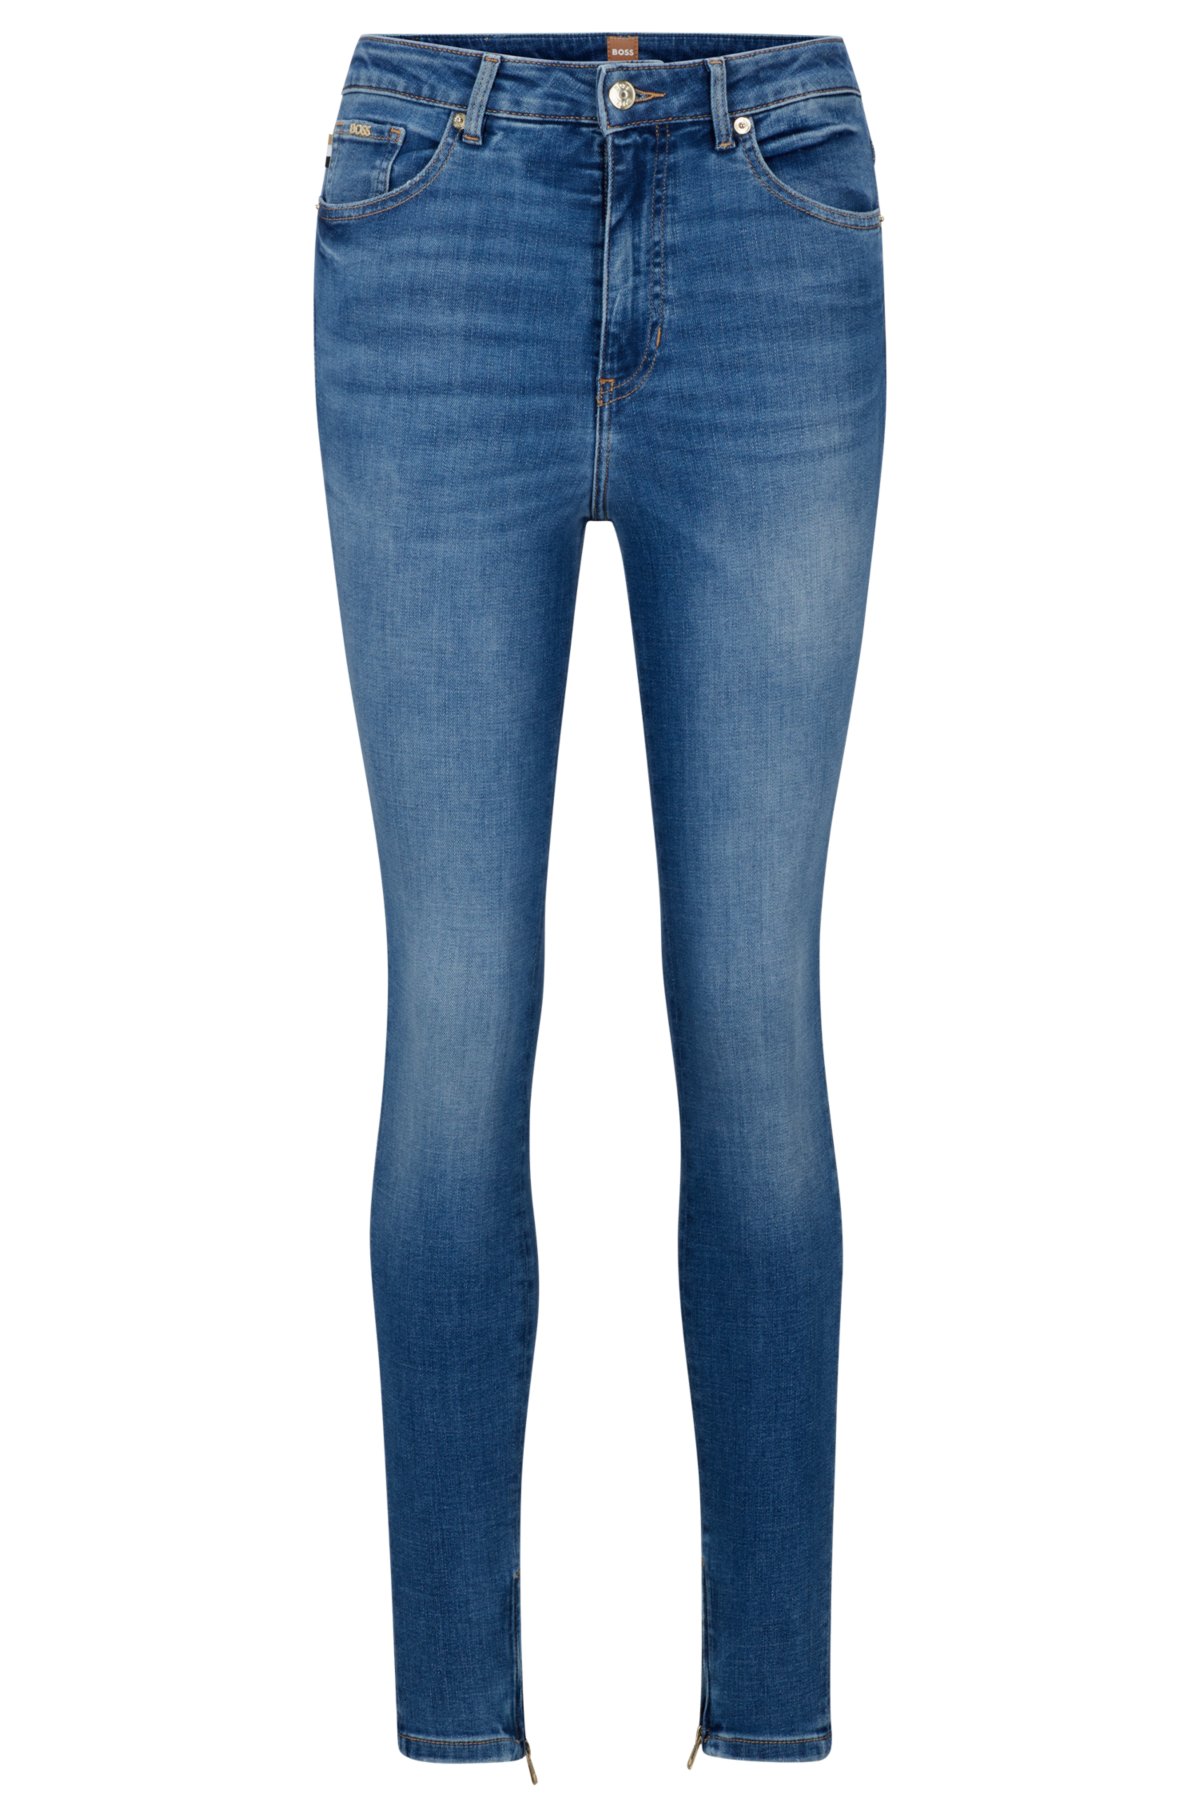 Superstretch jeans with high waist, 4-way stretch